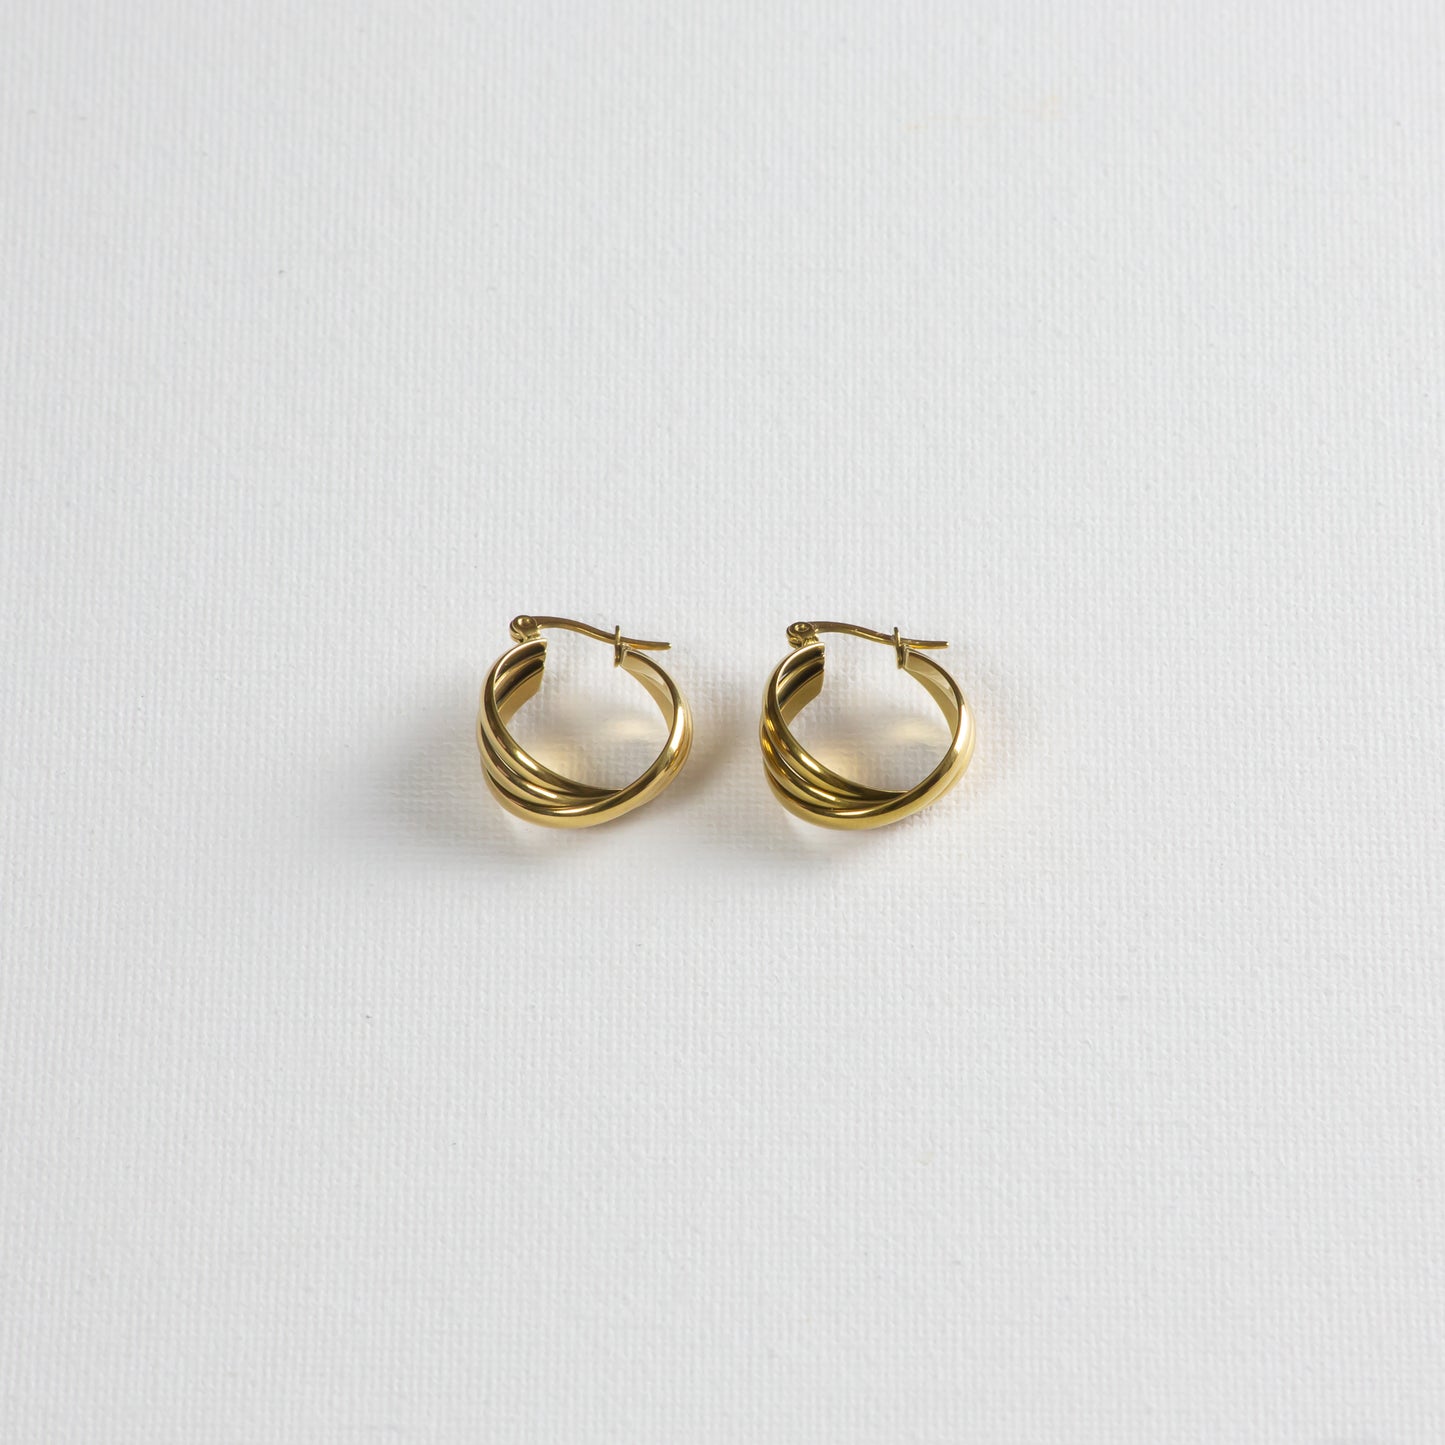 Gold earrings with three strands of small hoops creatively twisted together, showcased on a clean white background. The photo captures the design from a slight angle at the bottom.